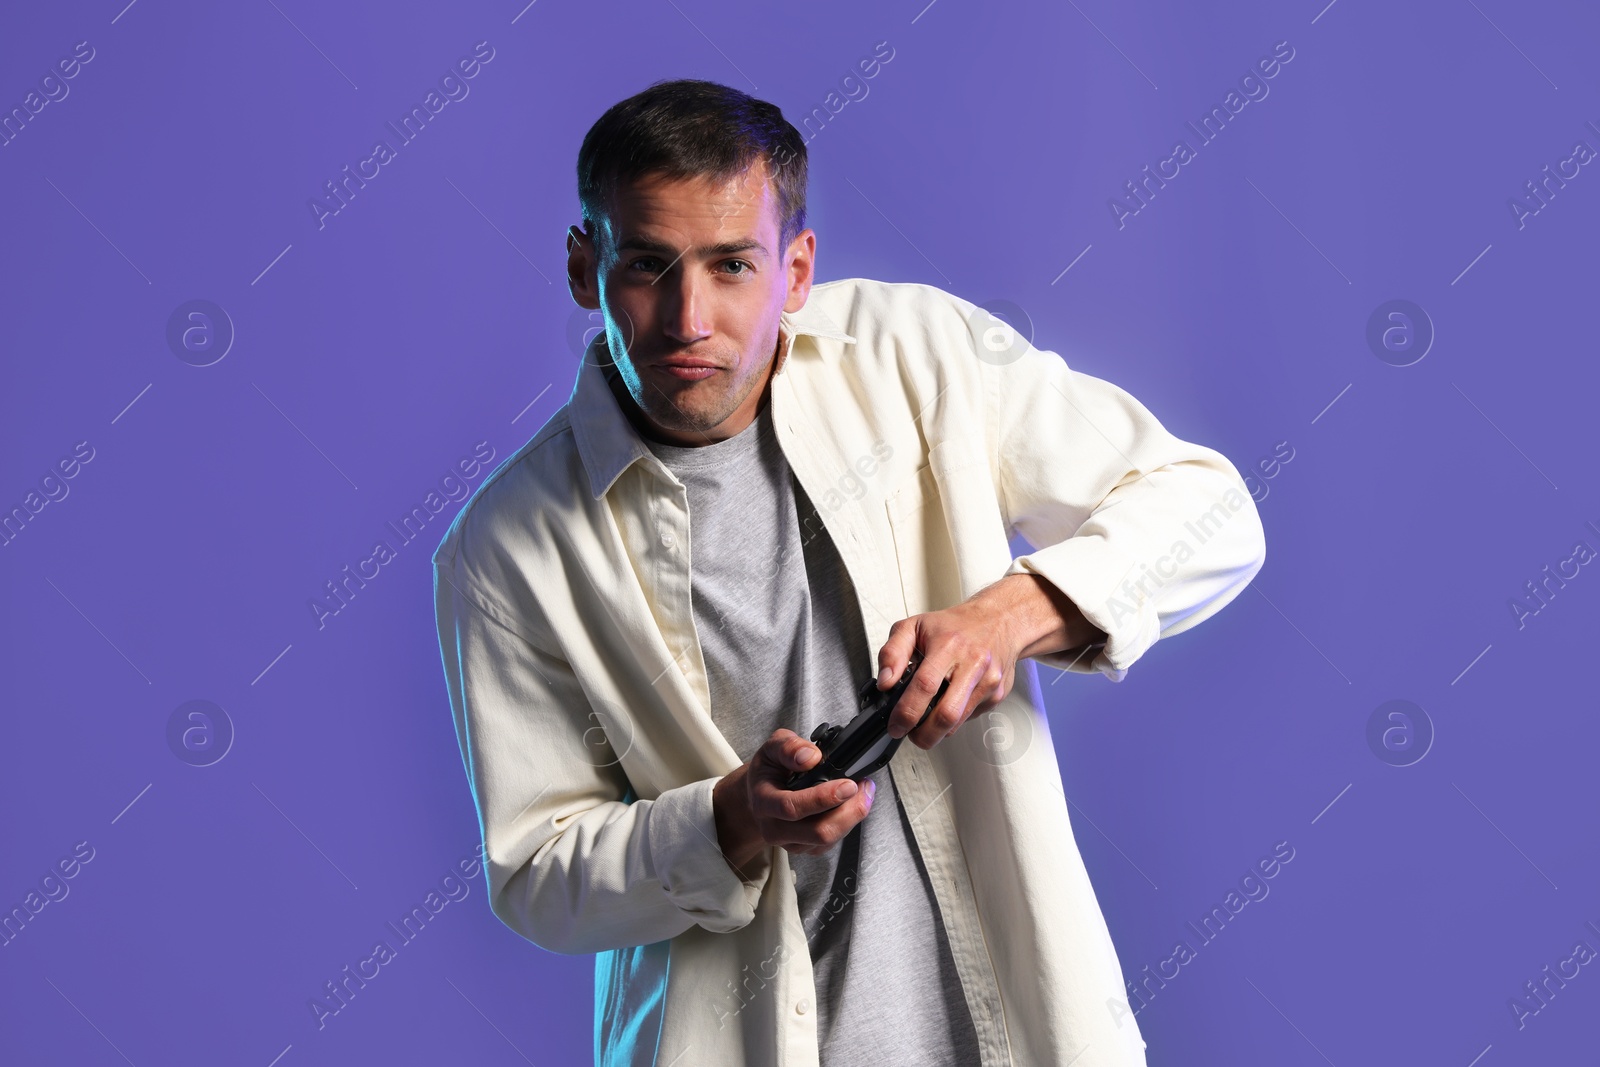 Photo of Man playing video games with controller on violet background